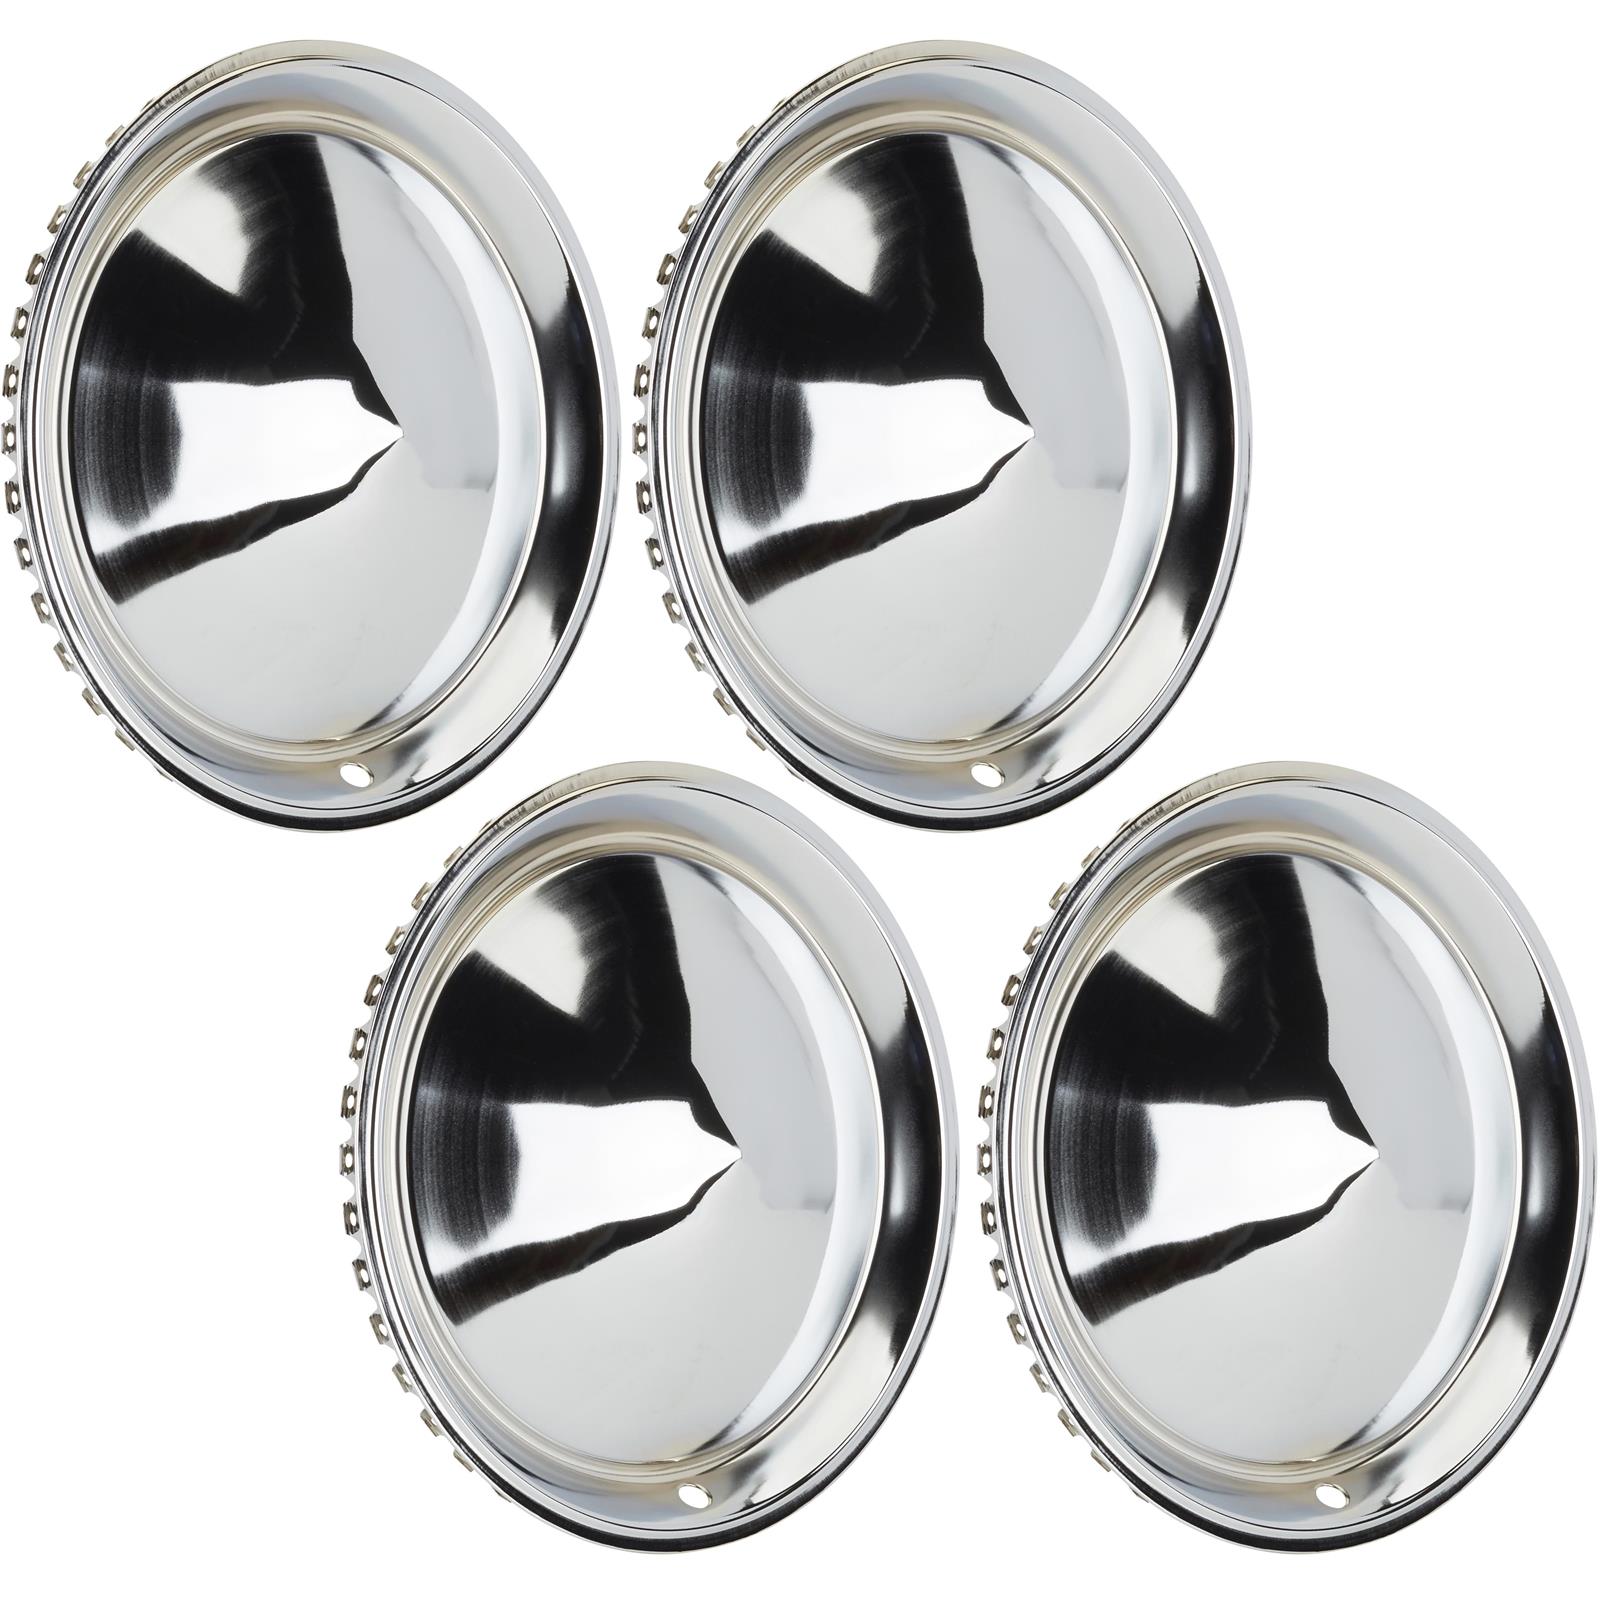 15"  CHROME 1957 PLYMOUTH HUBCAP (set of 4) CAPC5057